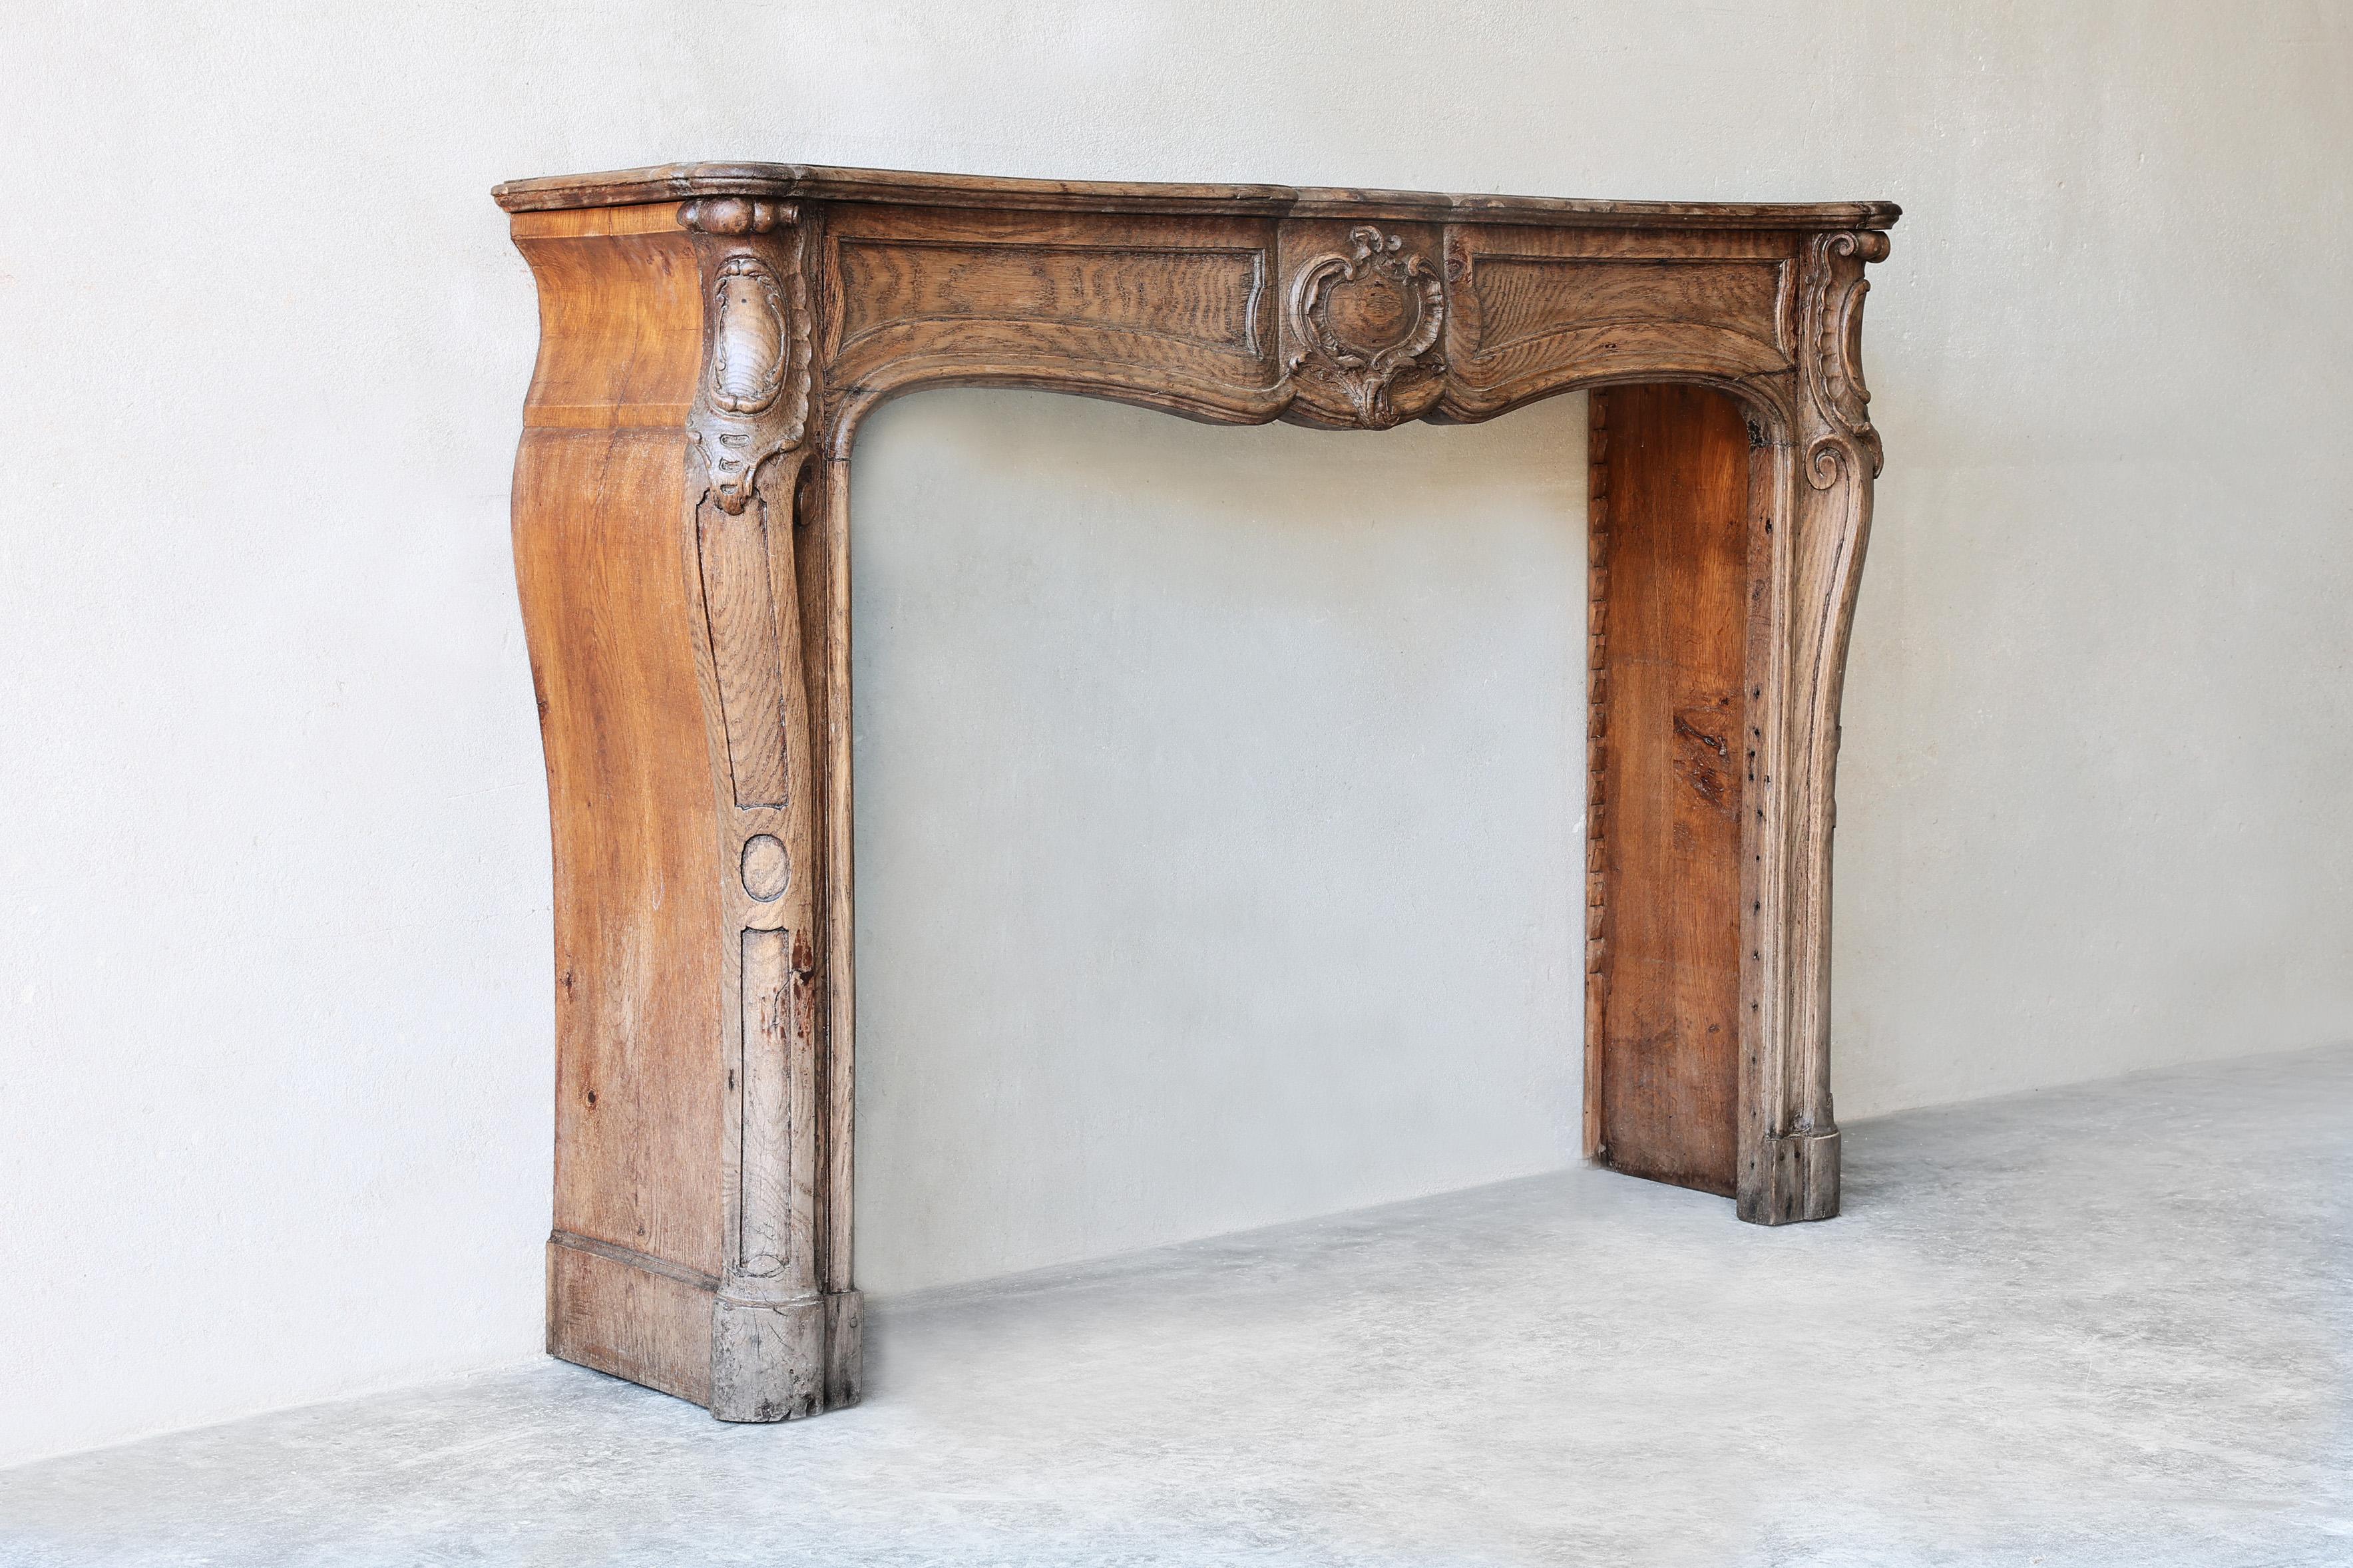 Beautiful oak fireplace in the style of Louis XV. This is an exceptional fireplace that we find every now and then! A beautifully crafted wooden fireplace with beautiful decorations and nice ornament in the middle. A fireplace with a warm appearance